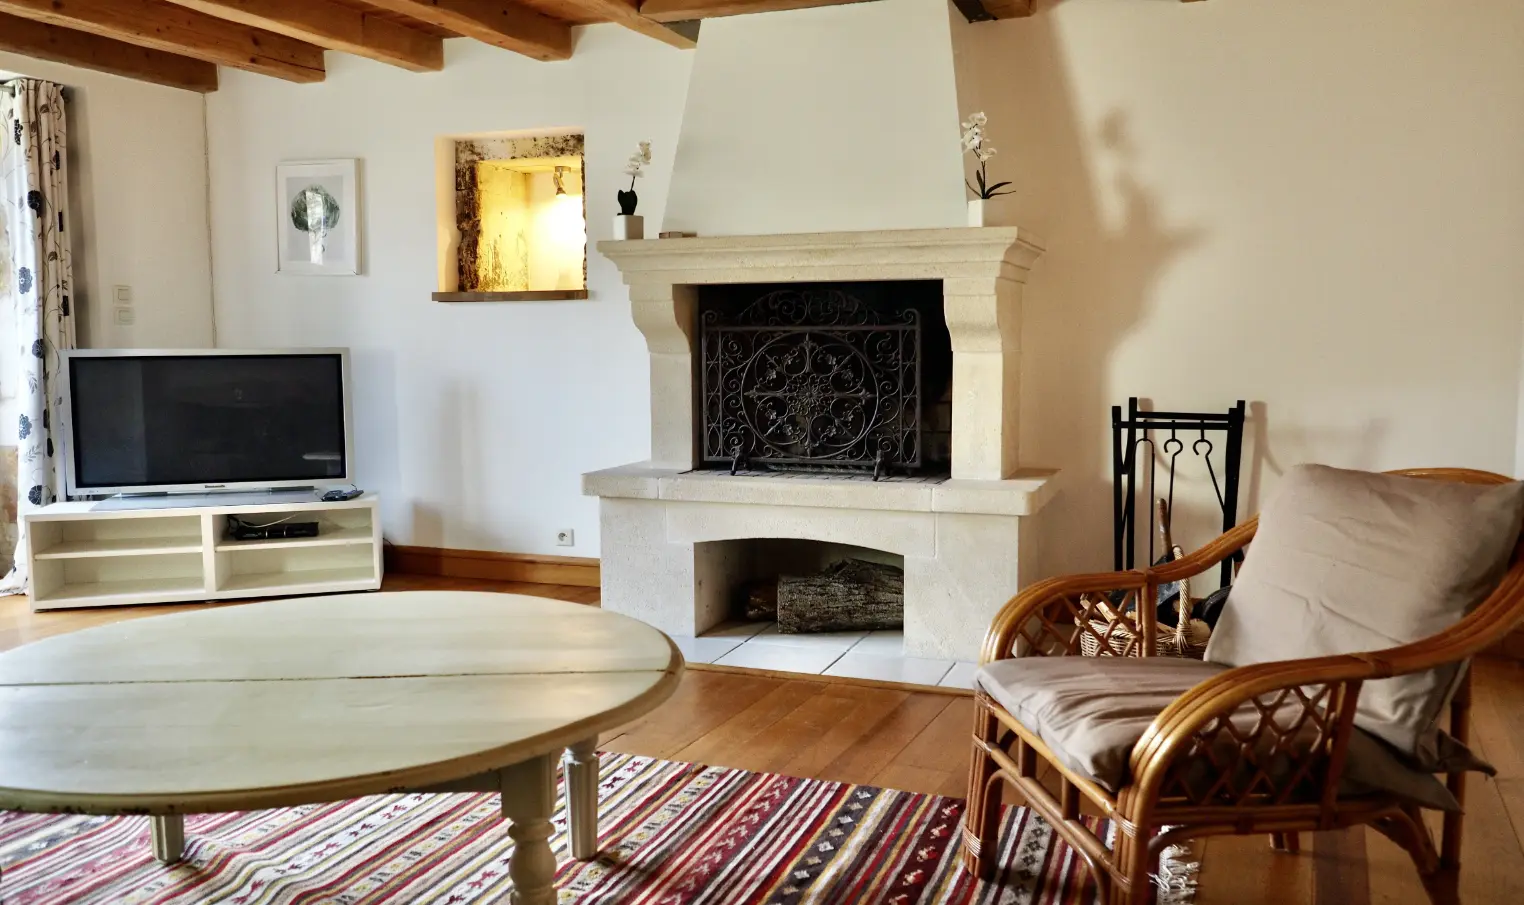 Coriandre House, cottage in Charente.